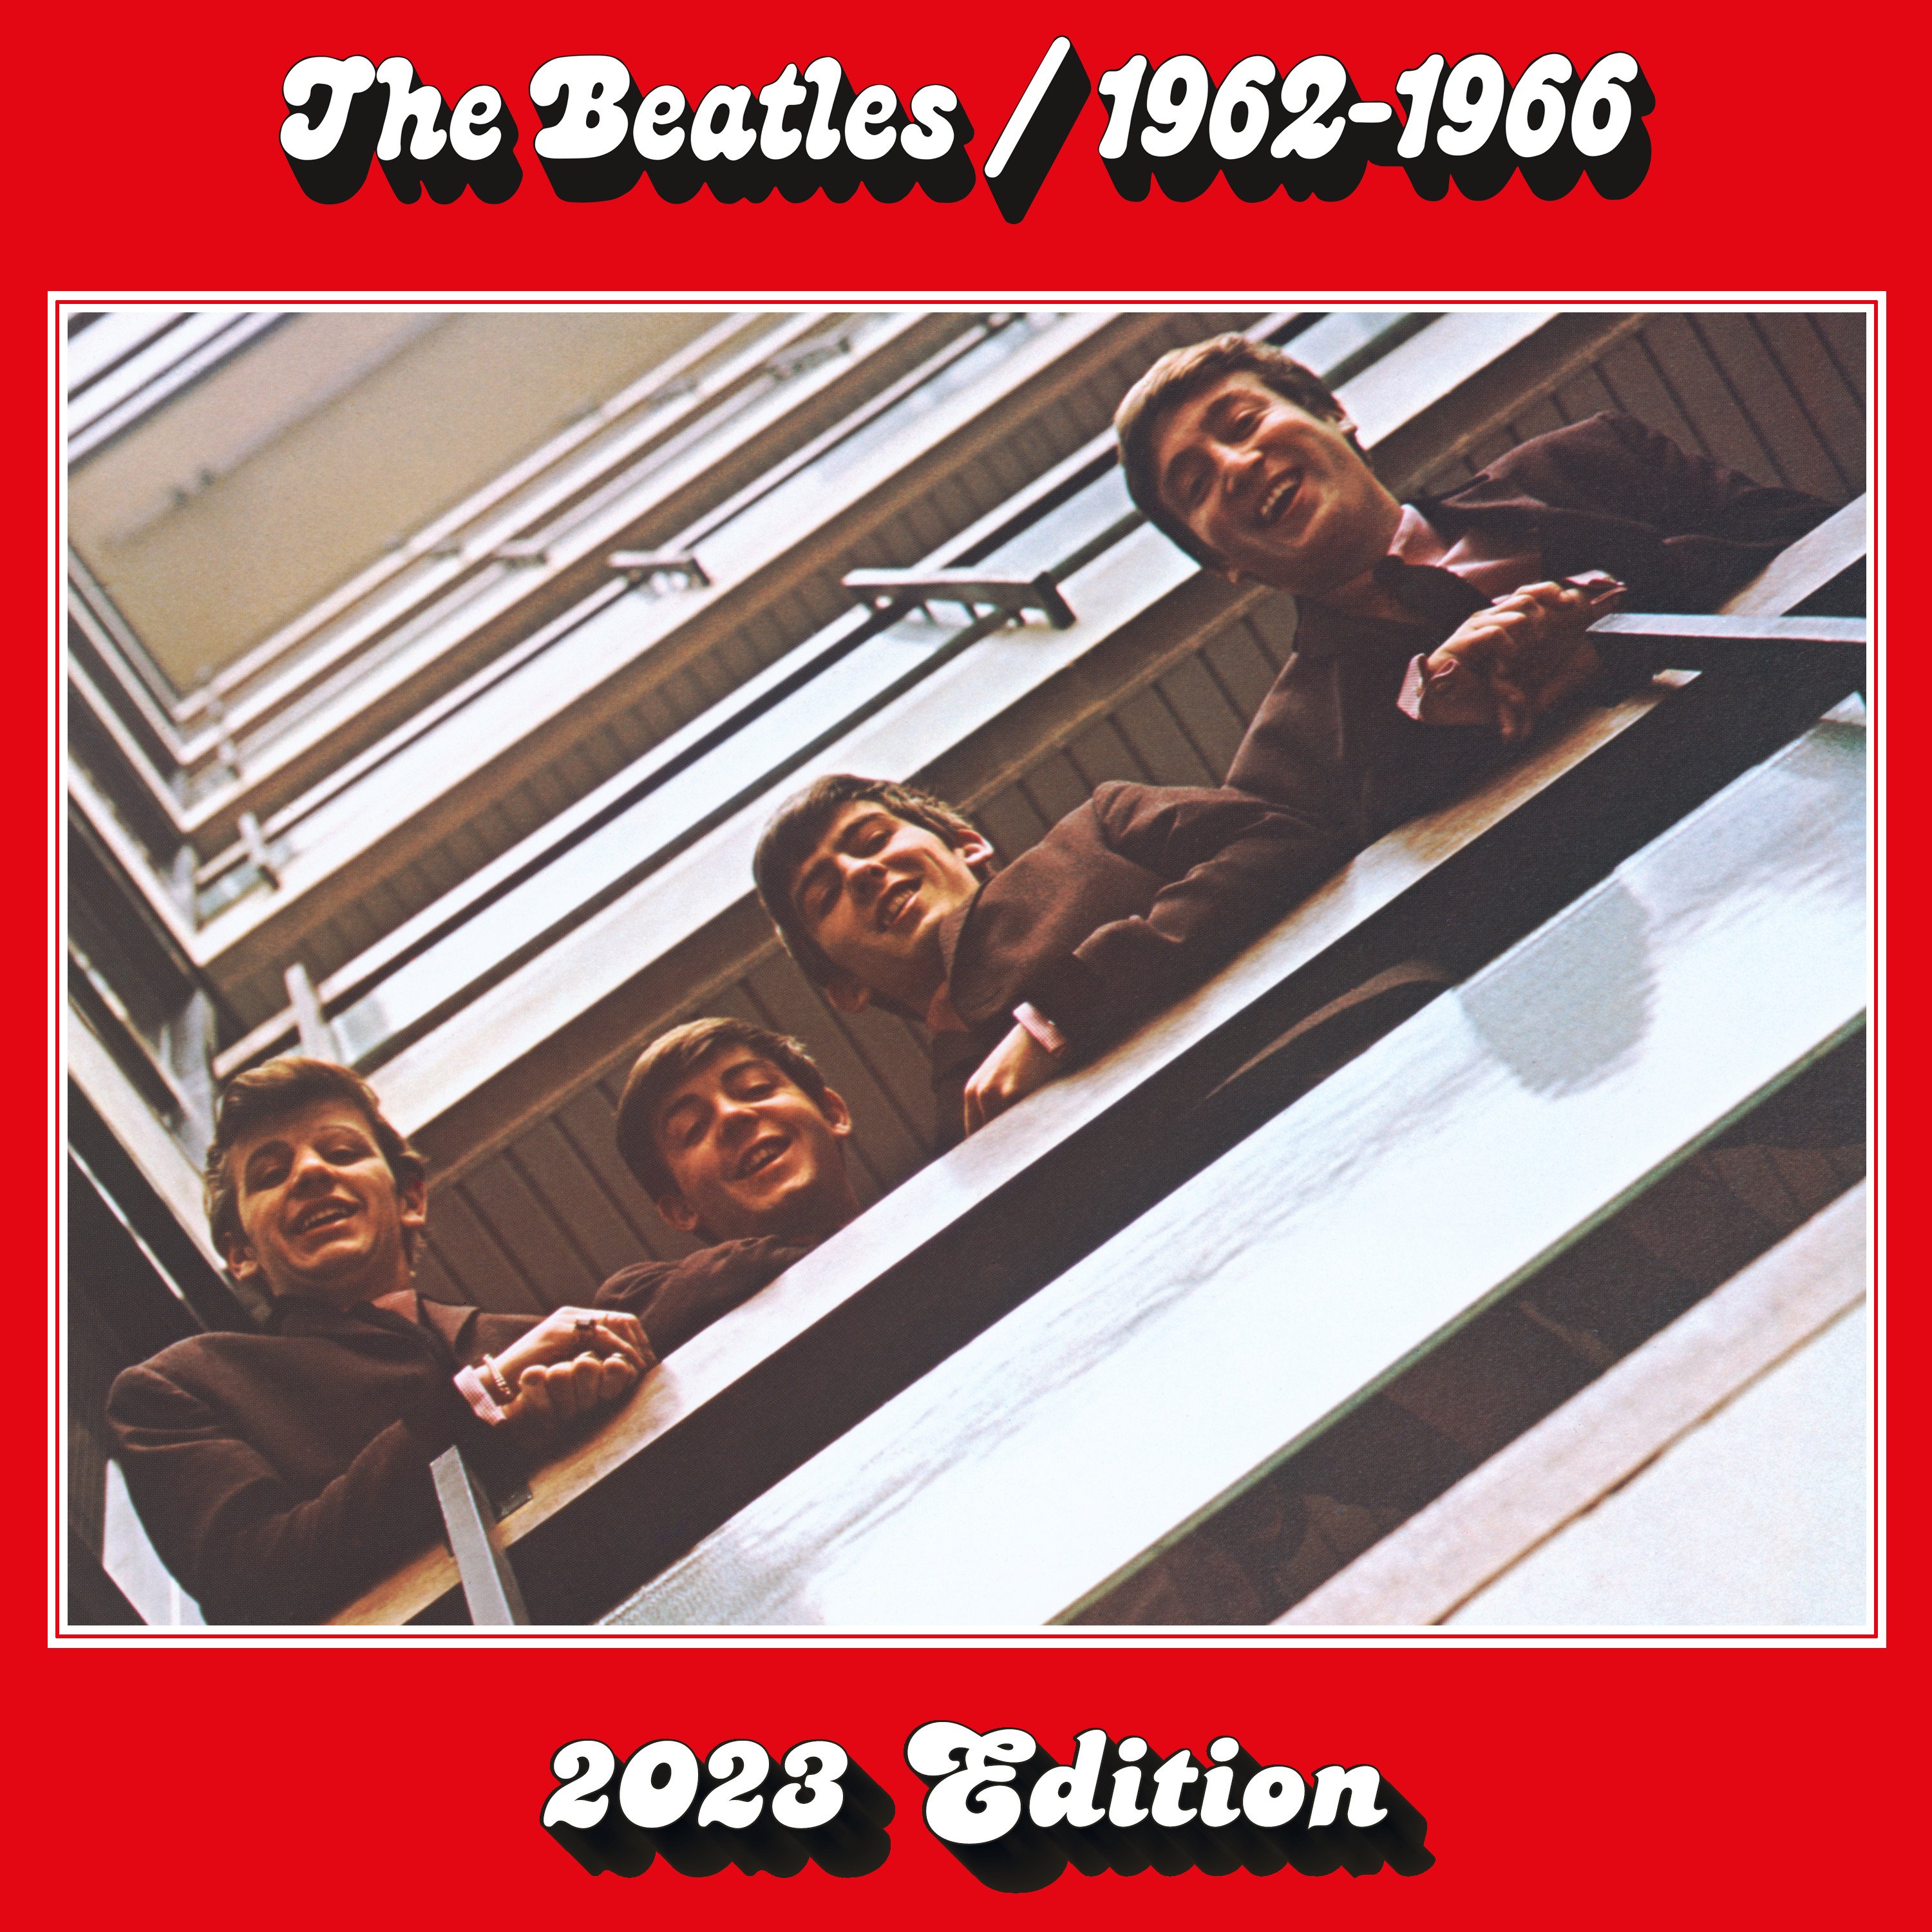 The Beatles - The Beatles 1962 - 1970 (2023 Edition) [24Bit-96kHz] FLAC [PMEDIA] ⭐️ Download